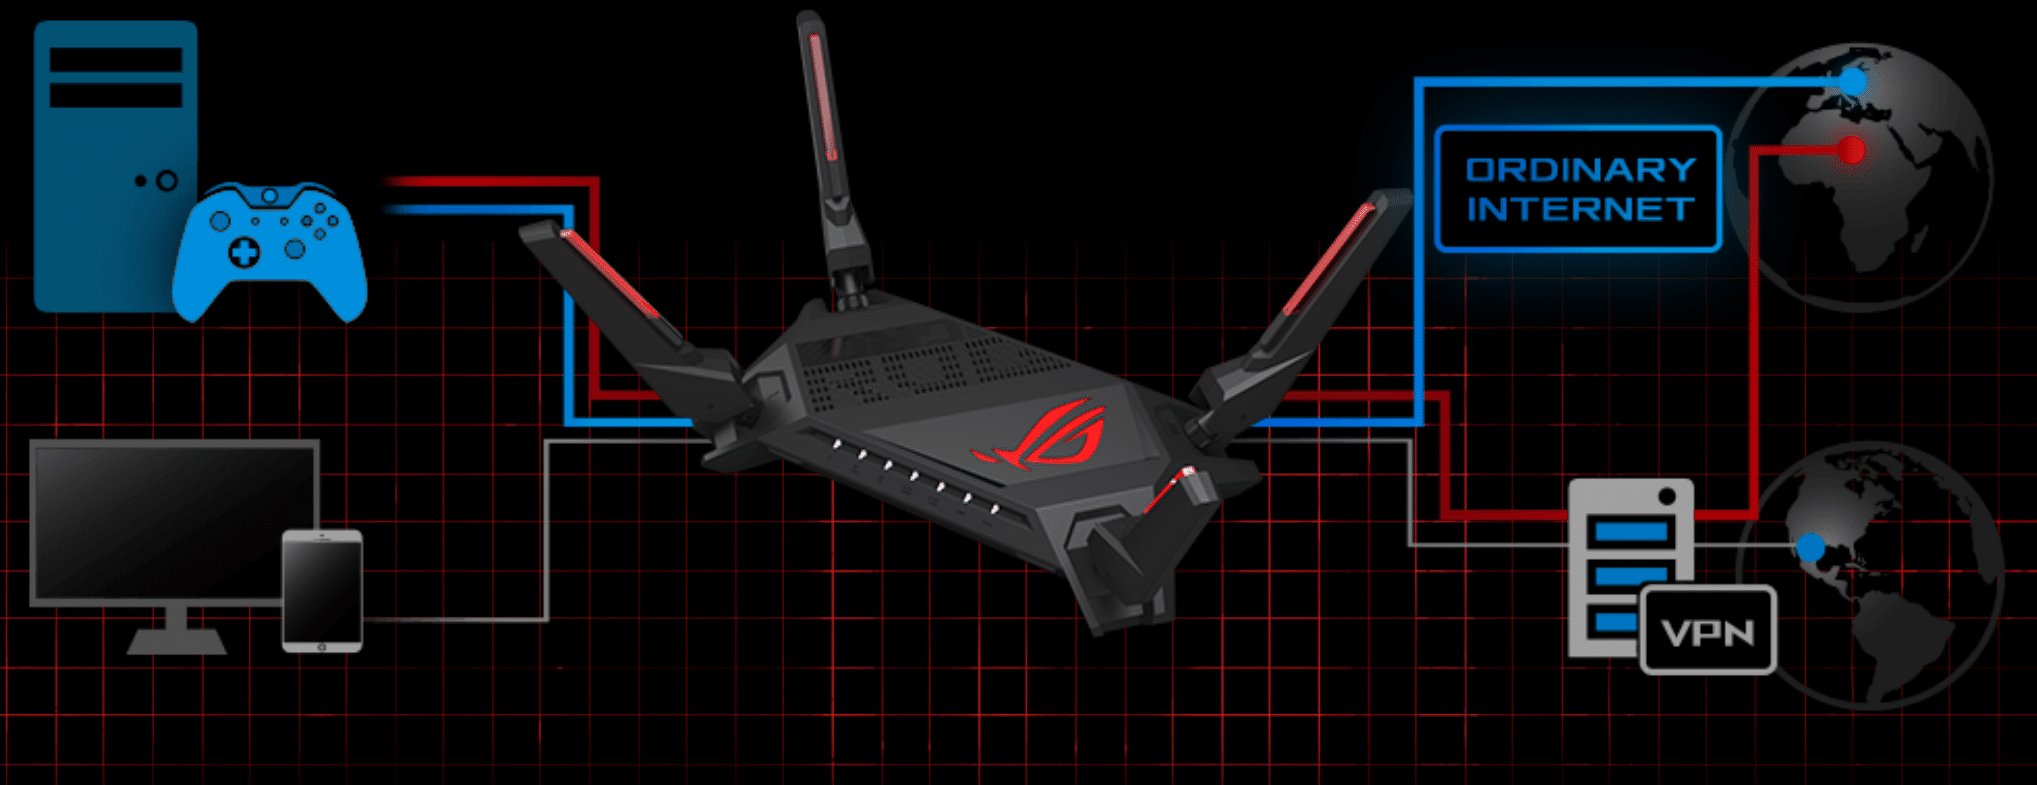 Asus delights us with the new ROG Rapture GT-AX6000 router